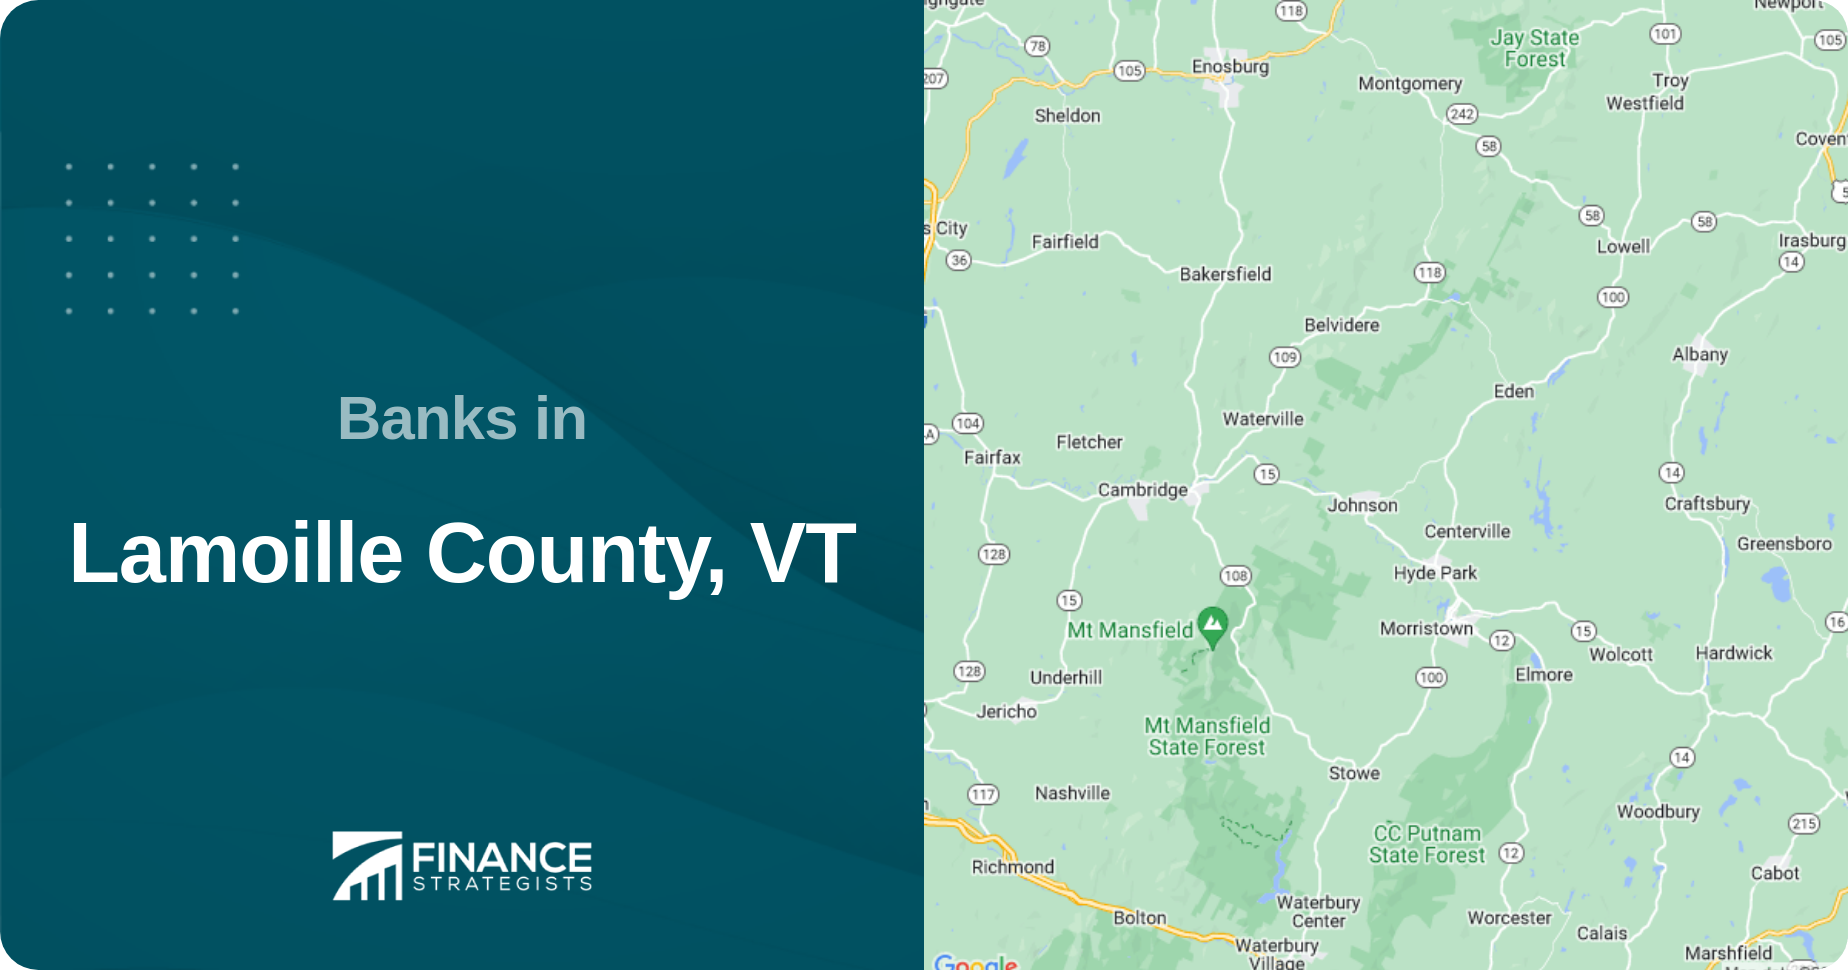 Banks in Lamoille County, VT